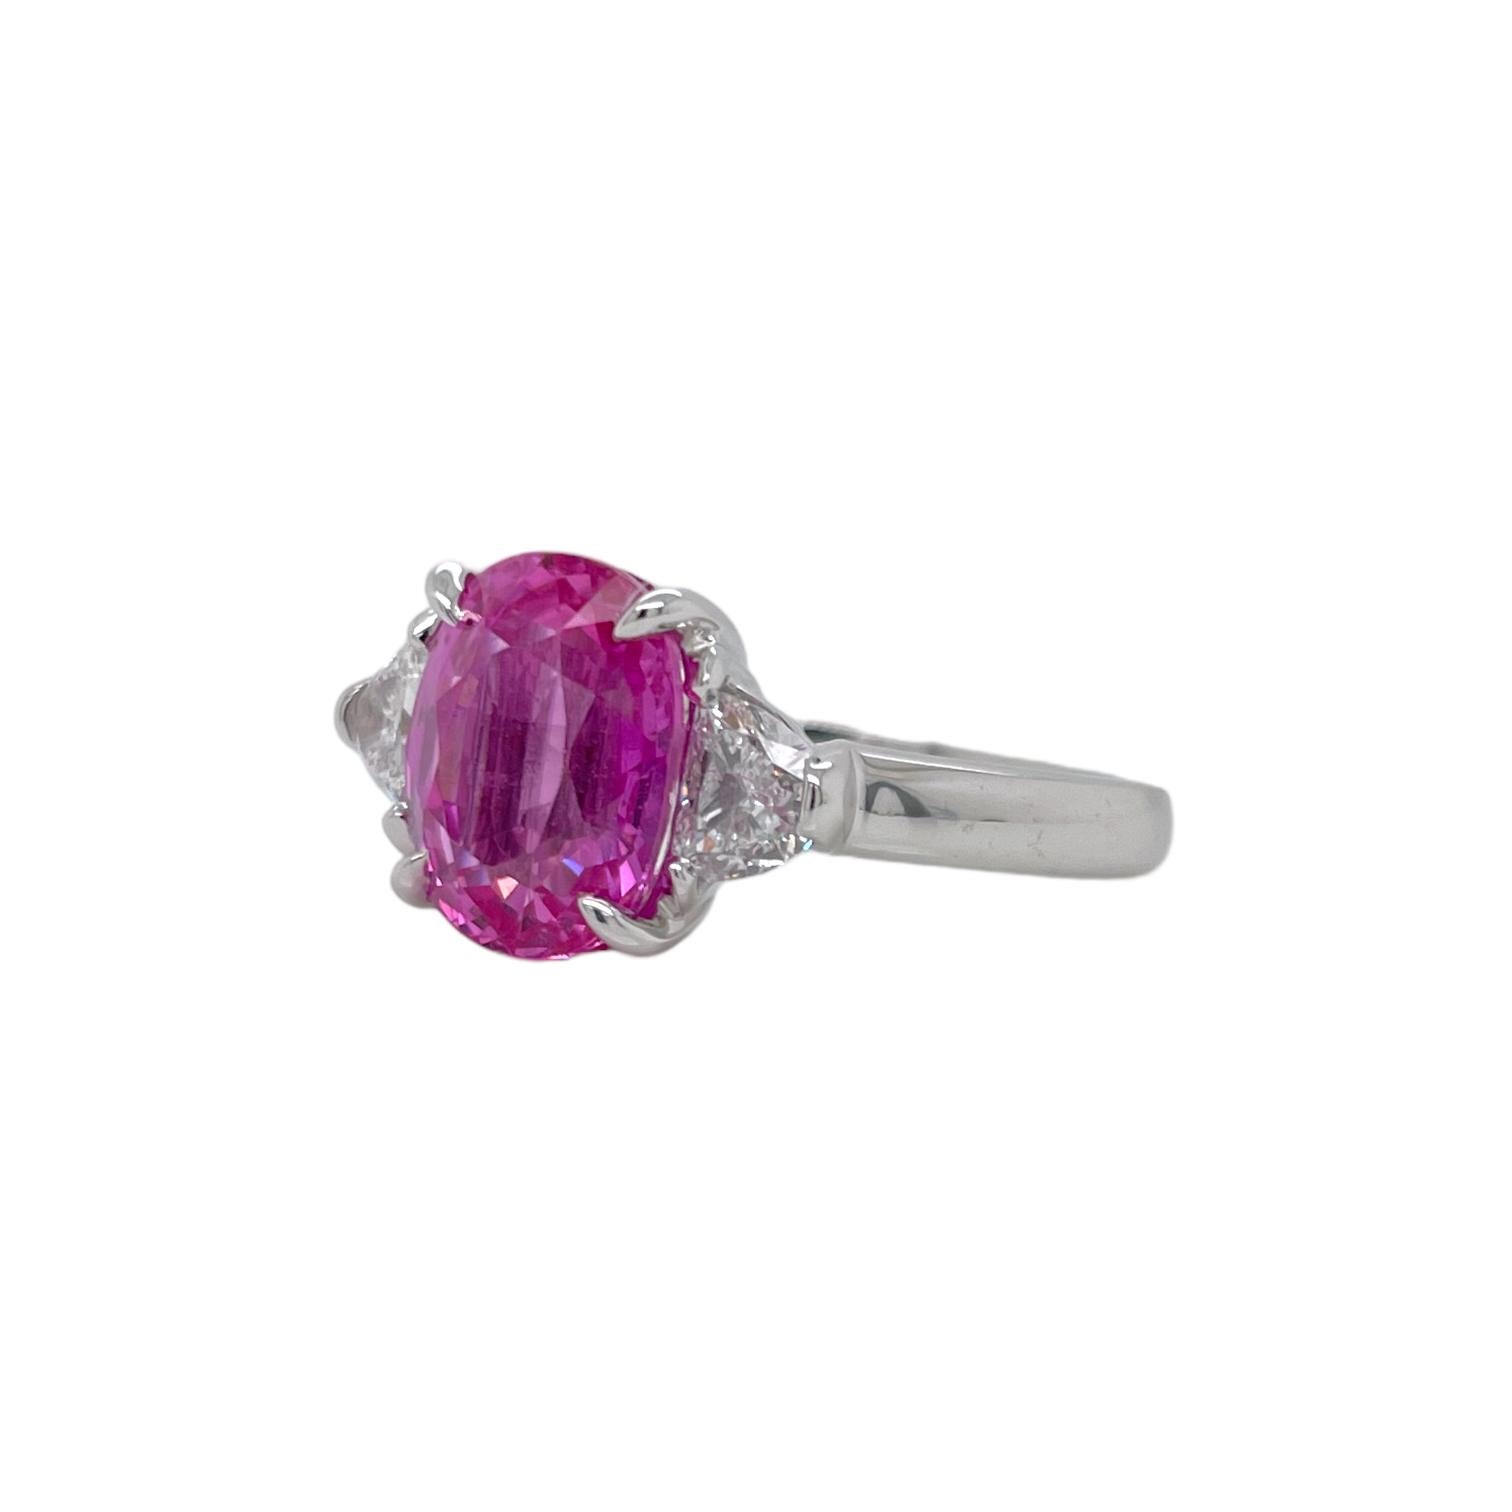 Ring contains one center GIA certified oval shape pink sapphire weighing 4.17ct. Center stone is accented by two side half moon cut diamonds weighing a total of 0.52cts. Pink Sapphire and diamonds are mounted in a handmade basket prong setting.